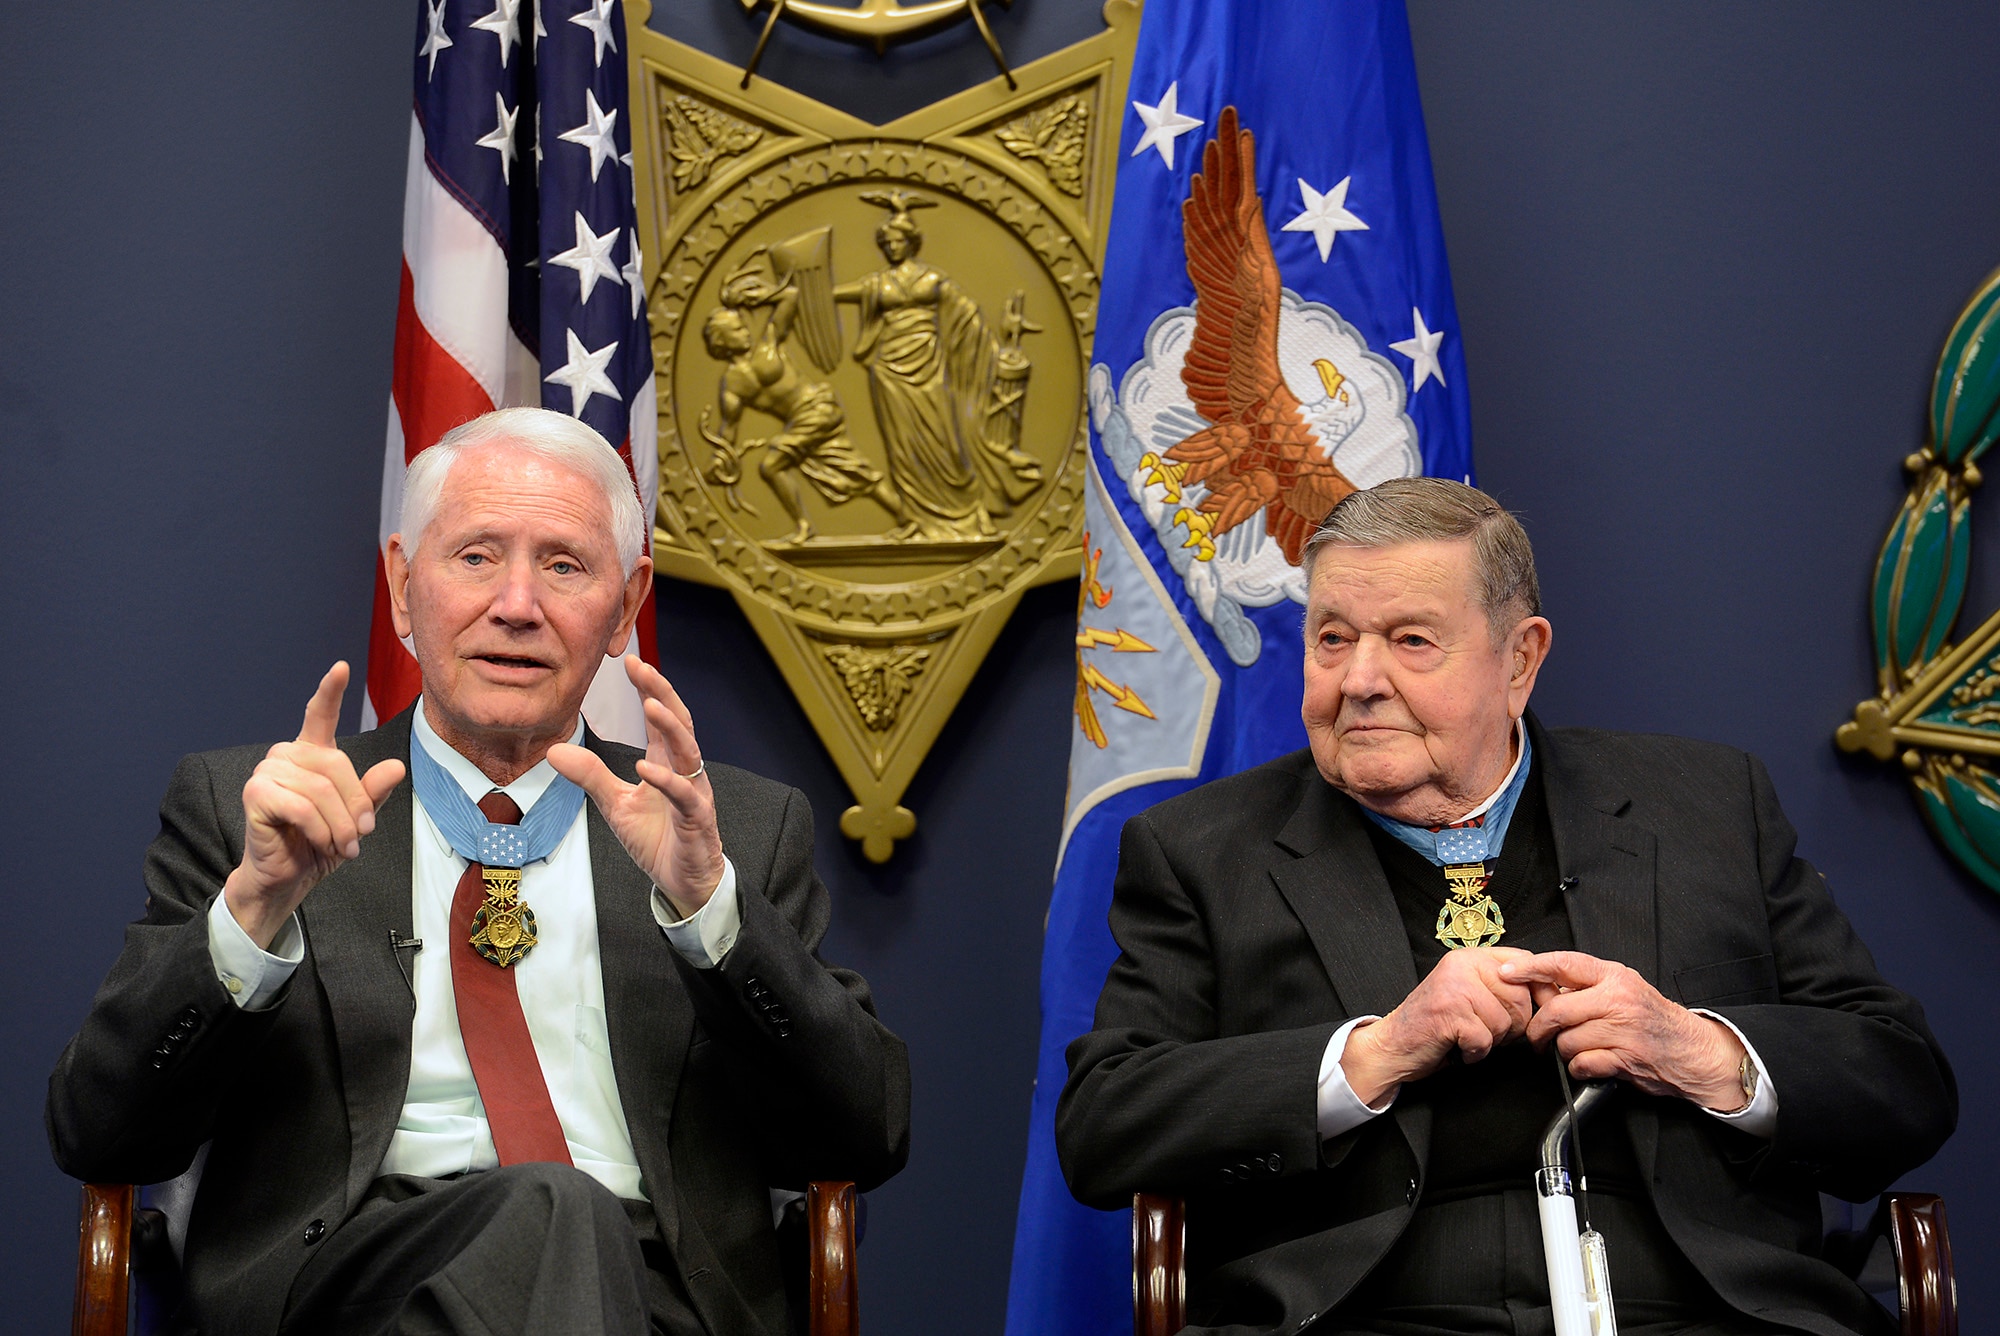 Retired Col. Leo Thorsness answers questions with retired Col. Joe Jackson, both Medals of Honor recipients, during a Q-and-A session March 24, 2015, in the Hall of Heroes at the Pentagon in Washington D.C. The pair spent about an hour taking questions from Air Staff members, and they also met with Secretary of the Air Force Deborah Lee James and Air Force Vice Chief of Staff Gen. Larry Spencer. (U.S. Air Force photo/Scott M. Ash)